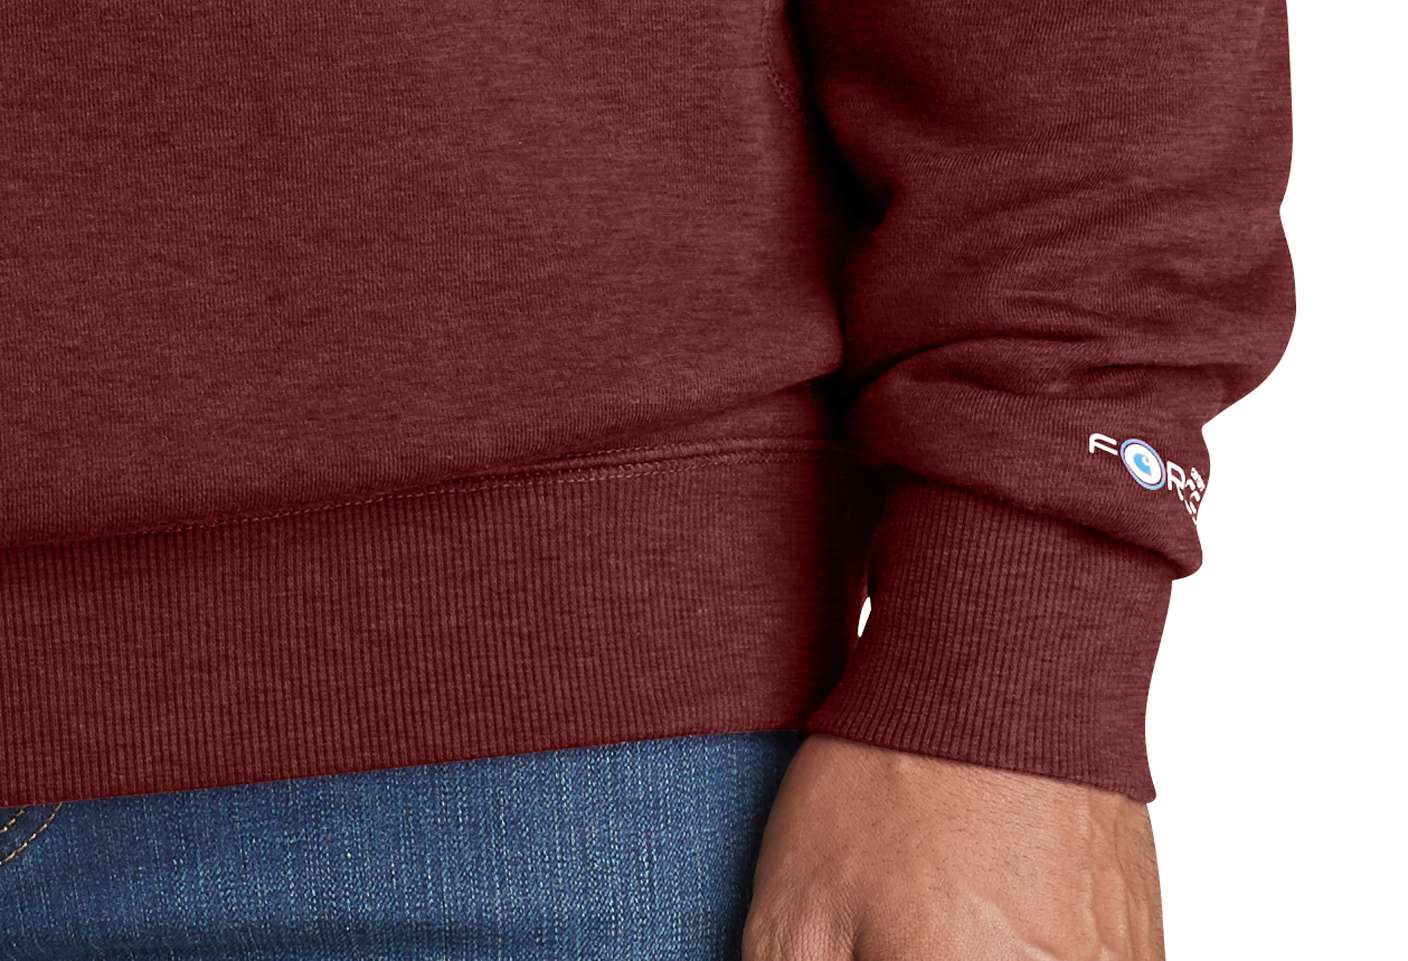  Rib-knit cuffs and waist help keep out the cold